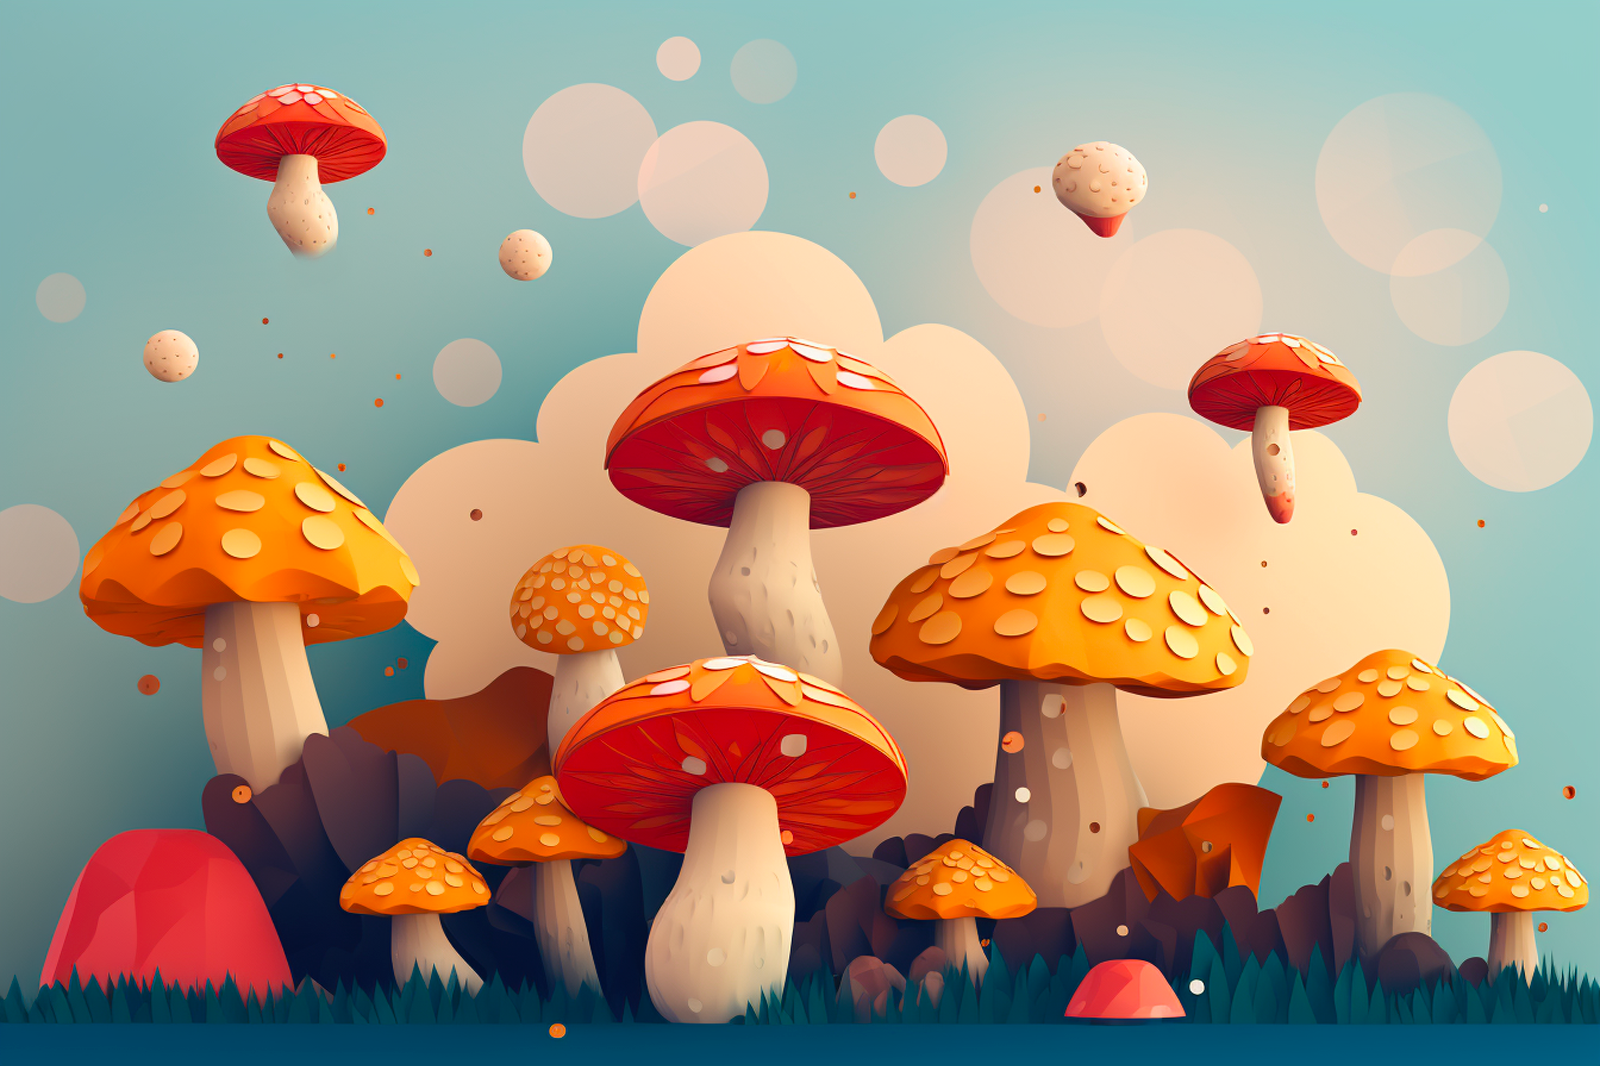 Enchanting assortment of mushrooms on a lush green field under a serene blue sky with fluffy white clouds